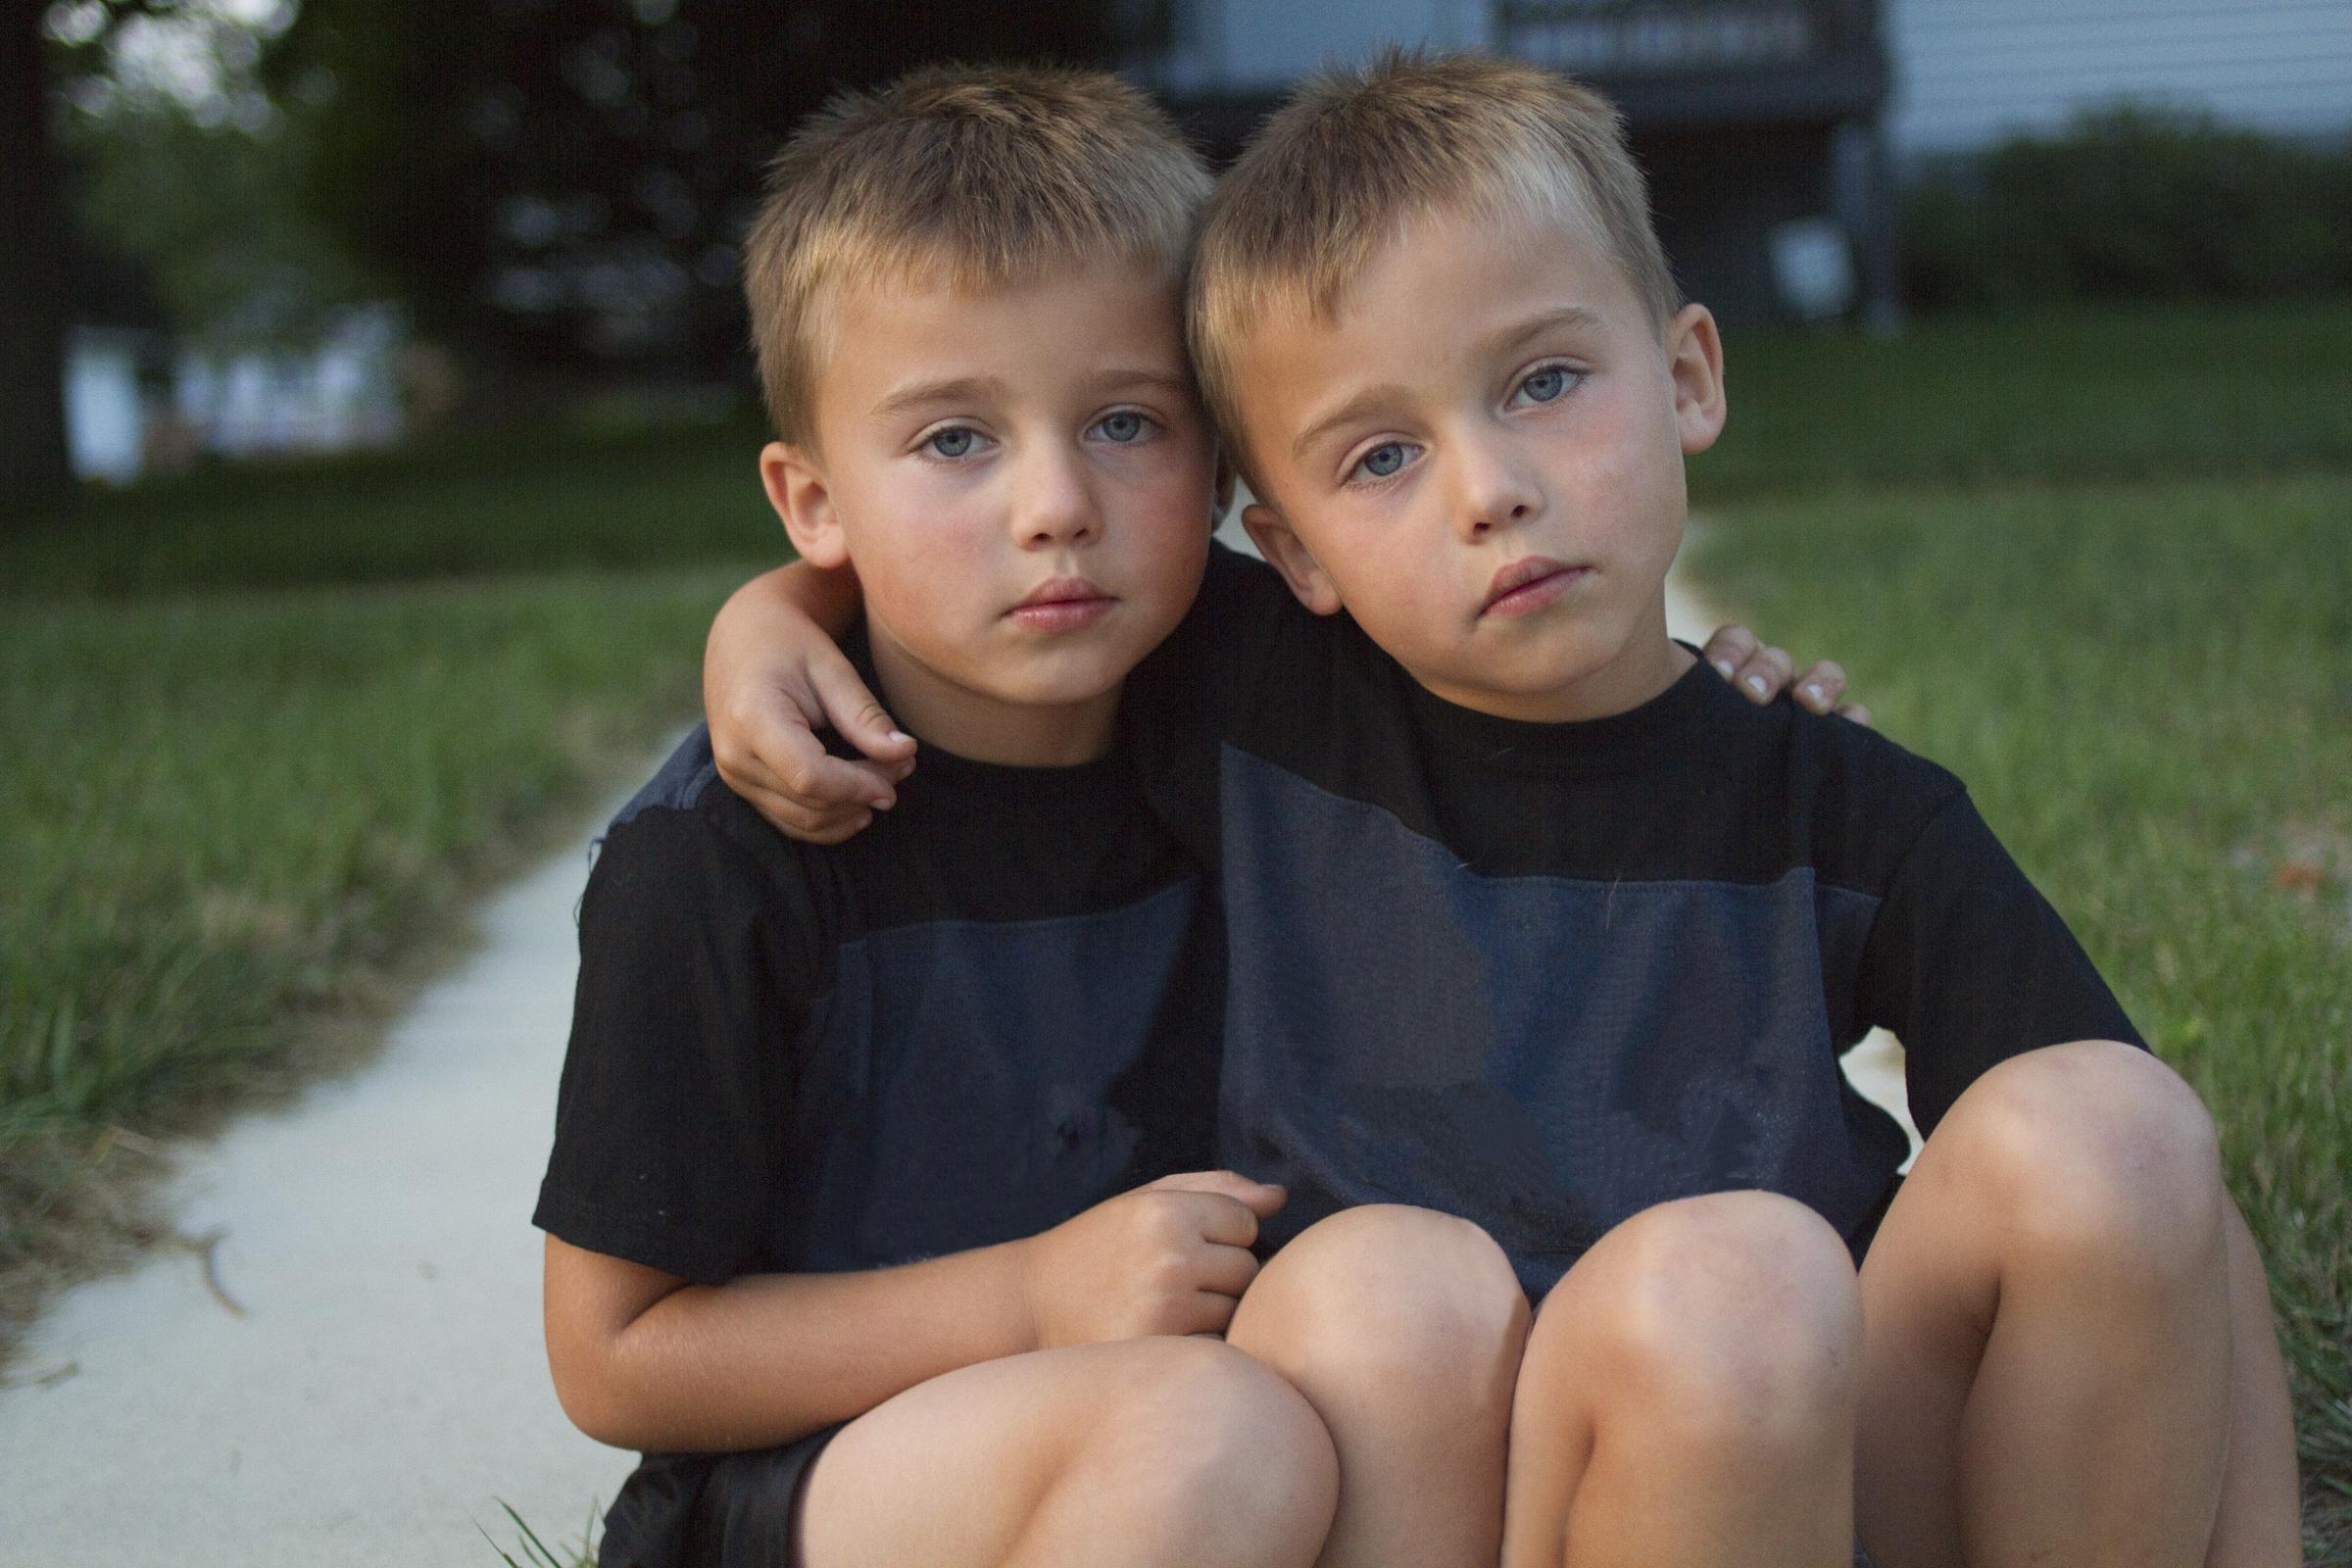 Two identical looking boys | Source: GettyImages